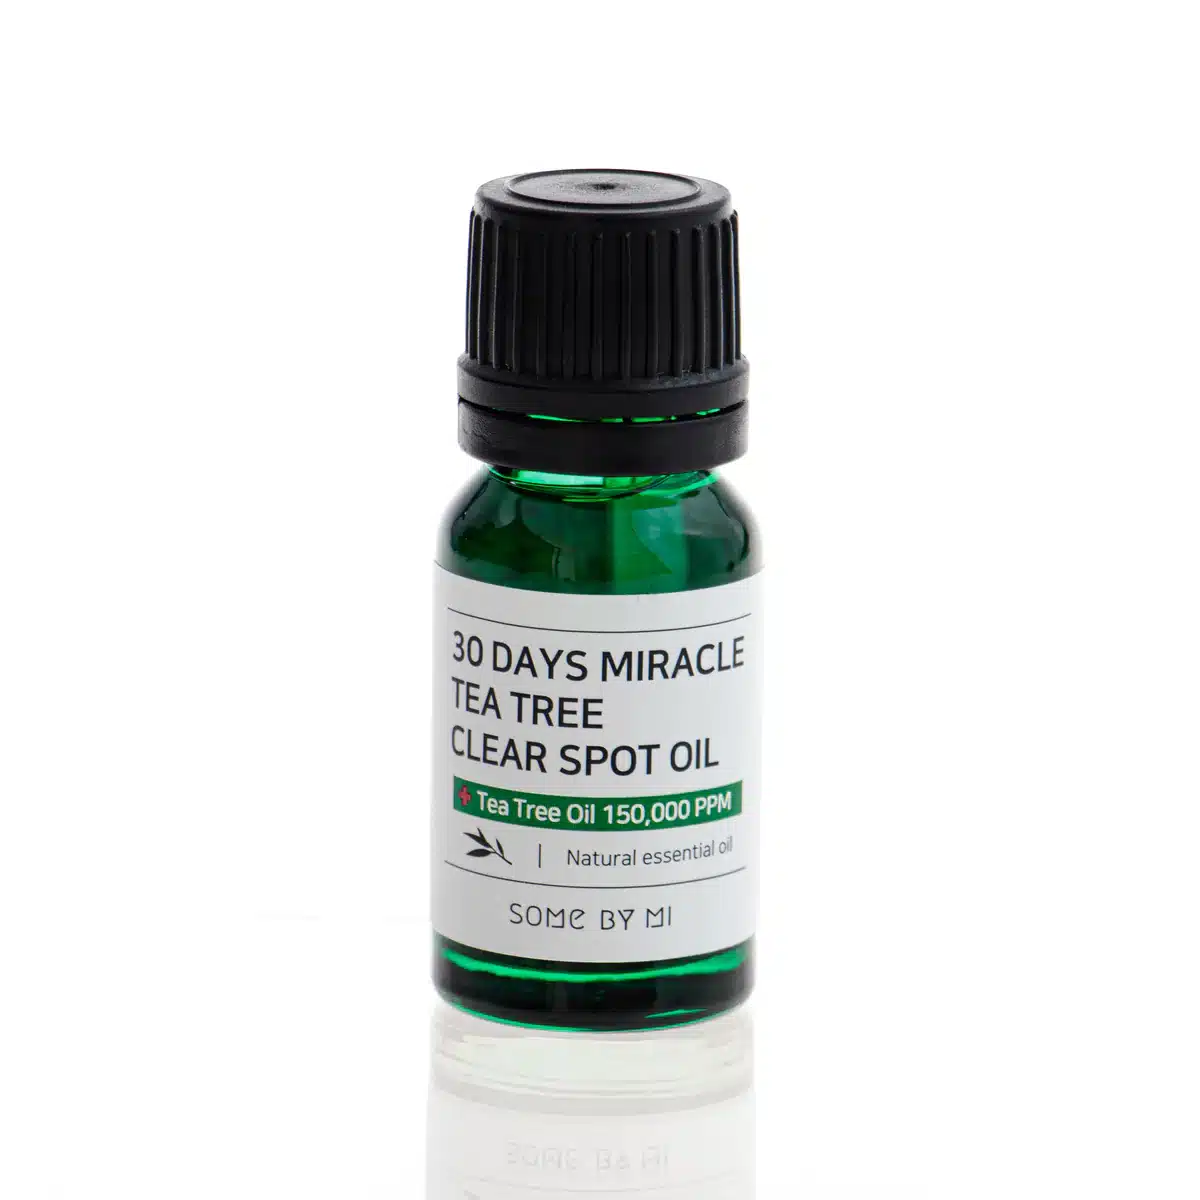 SOME BY MI 30 Days Miracle Tea Tree Clear Spot Oil 10 ml